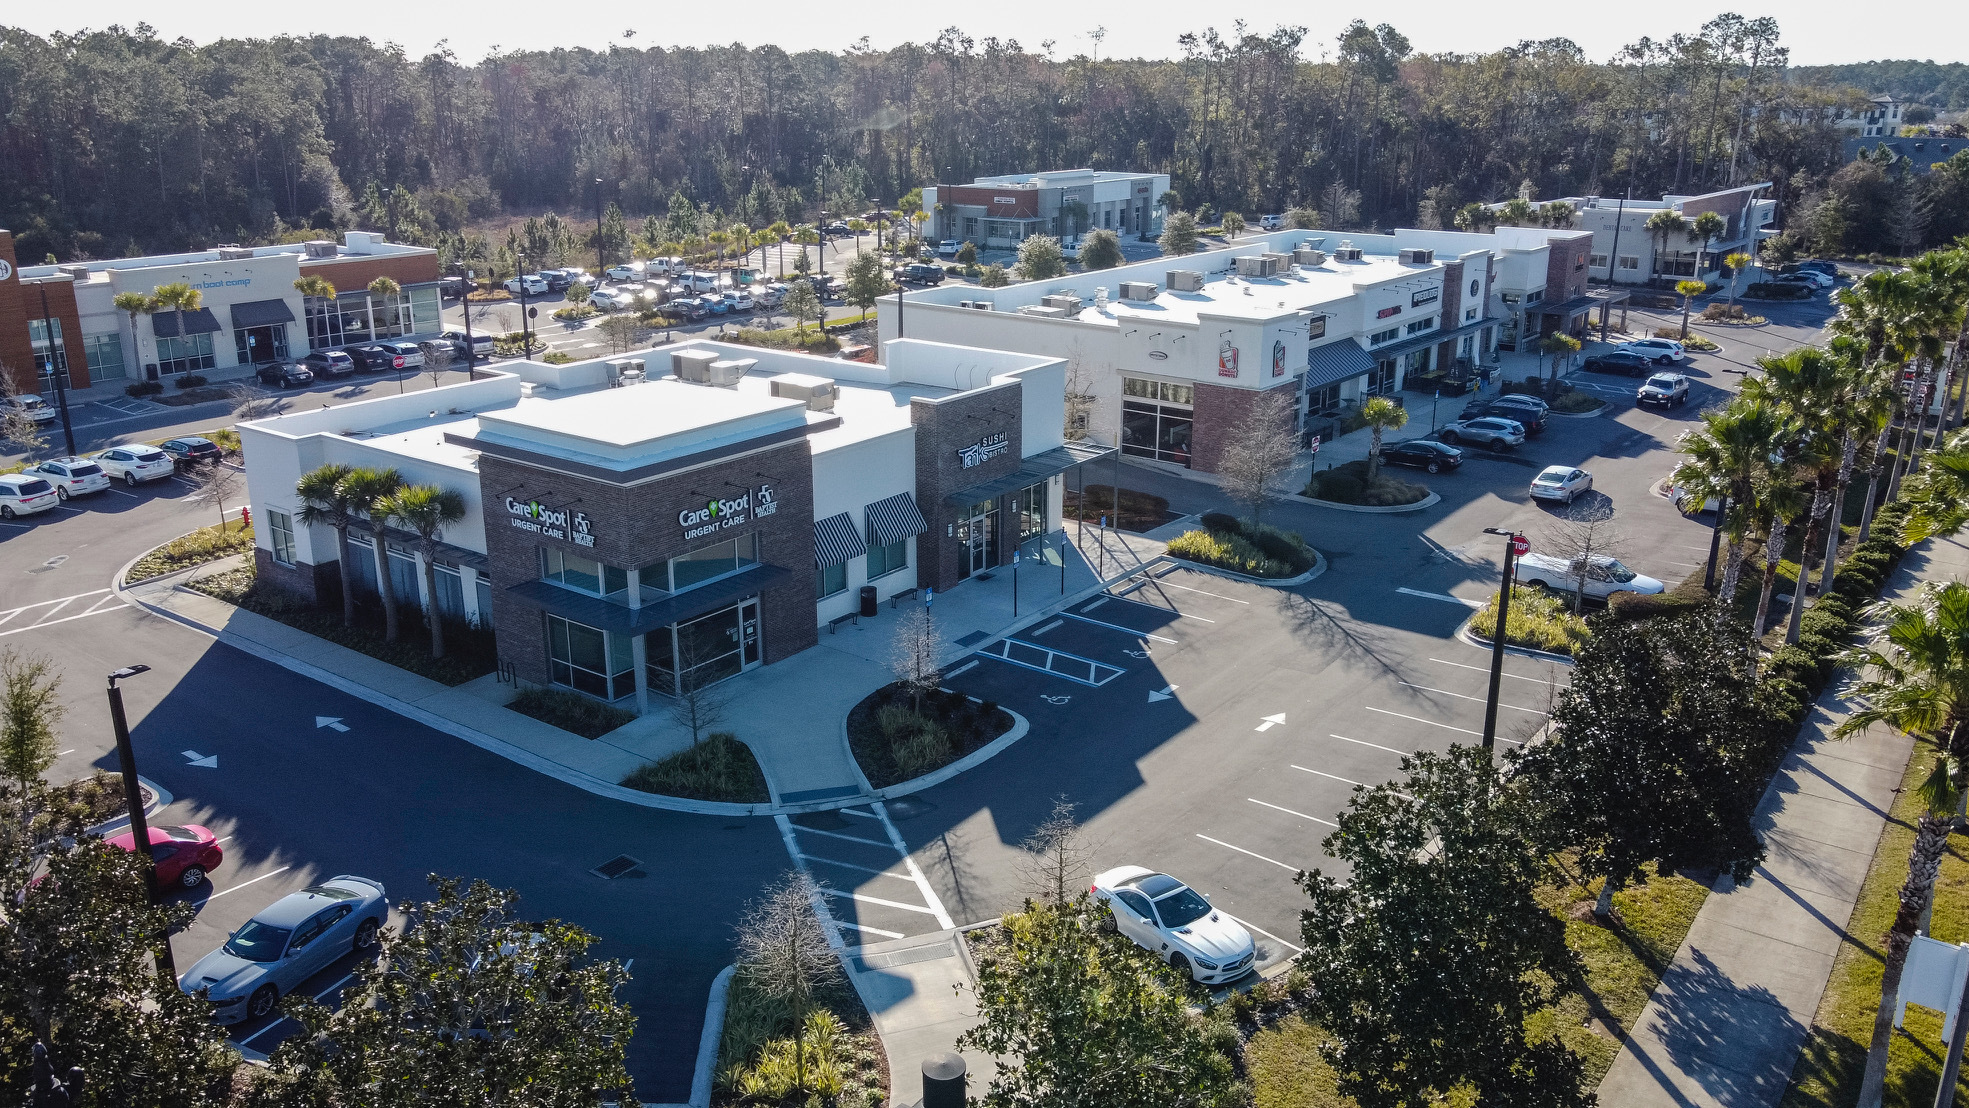 Skinner Bros. Realty sold five multitenant retail buildings in Nocatee Town Center for $15.6 million.